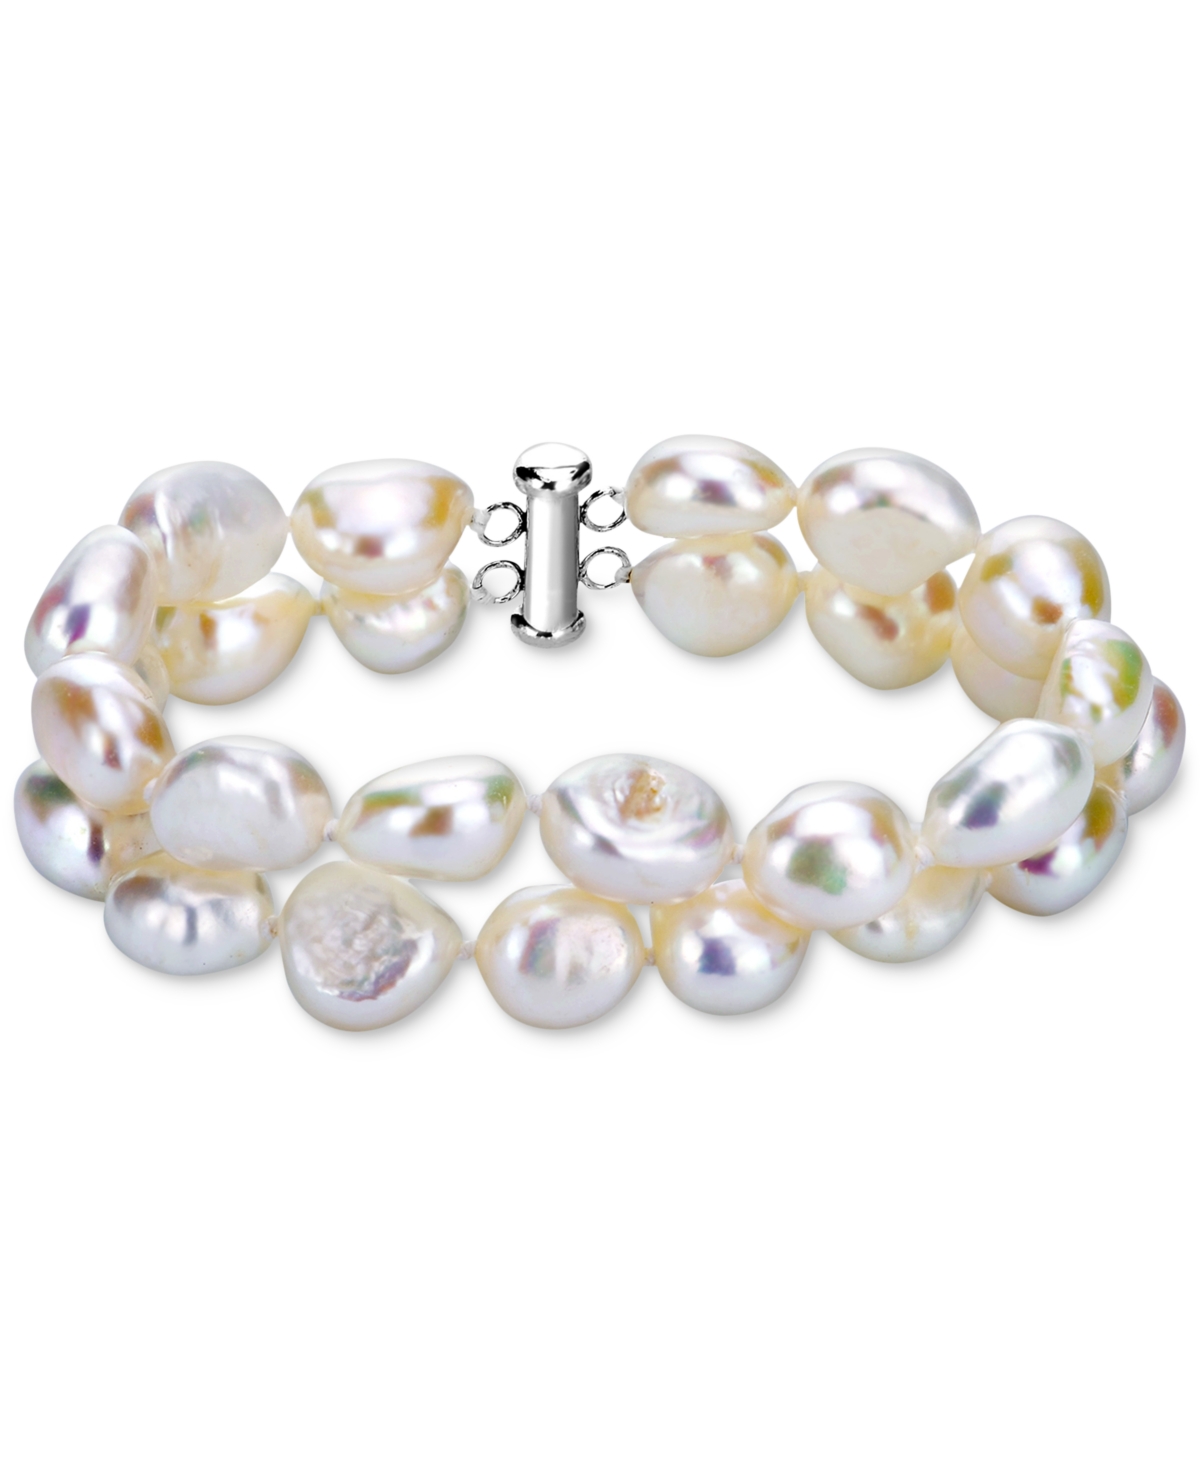 Cultured Freshwater Baroque Pearl (11-12mm) Double Row Bracelet - White